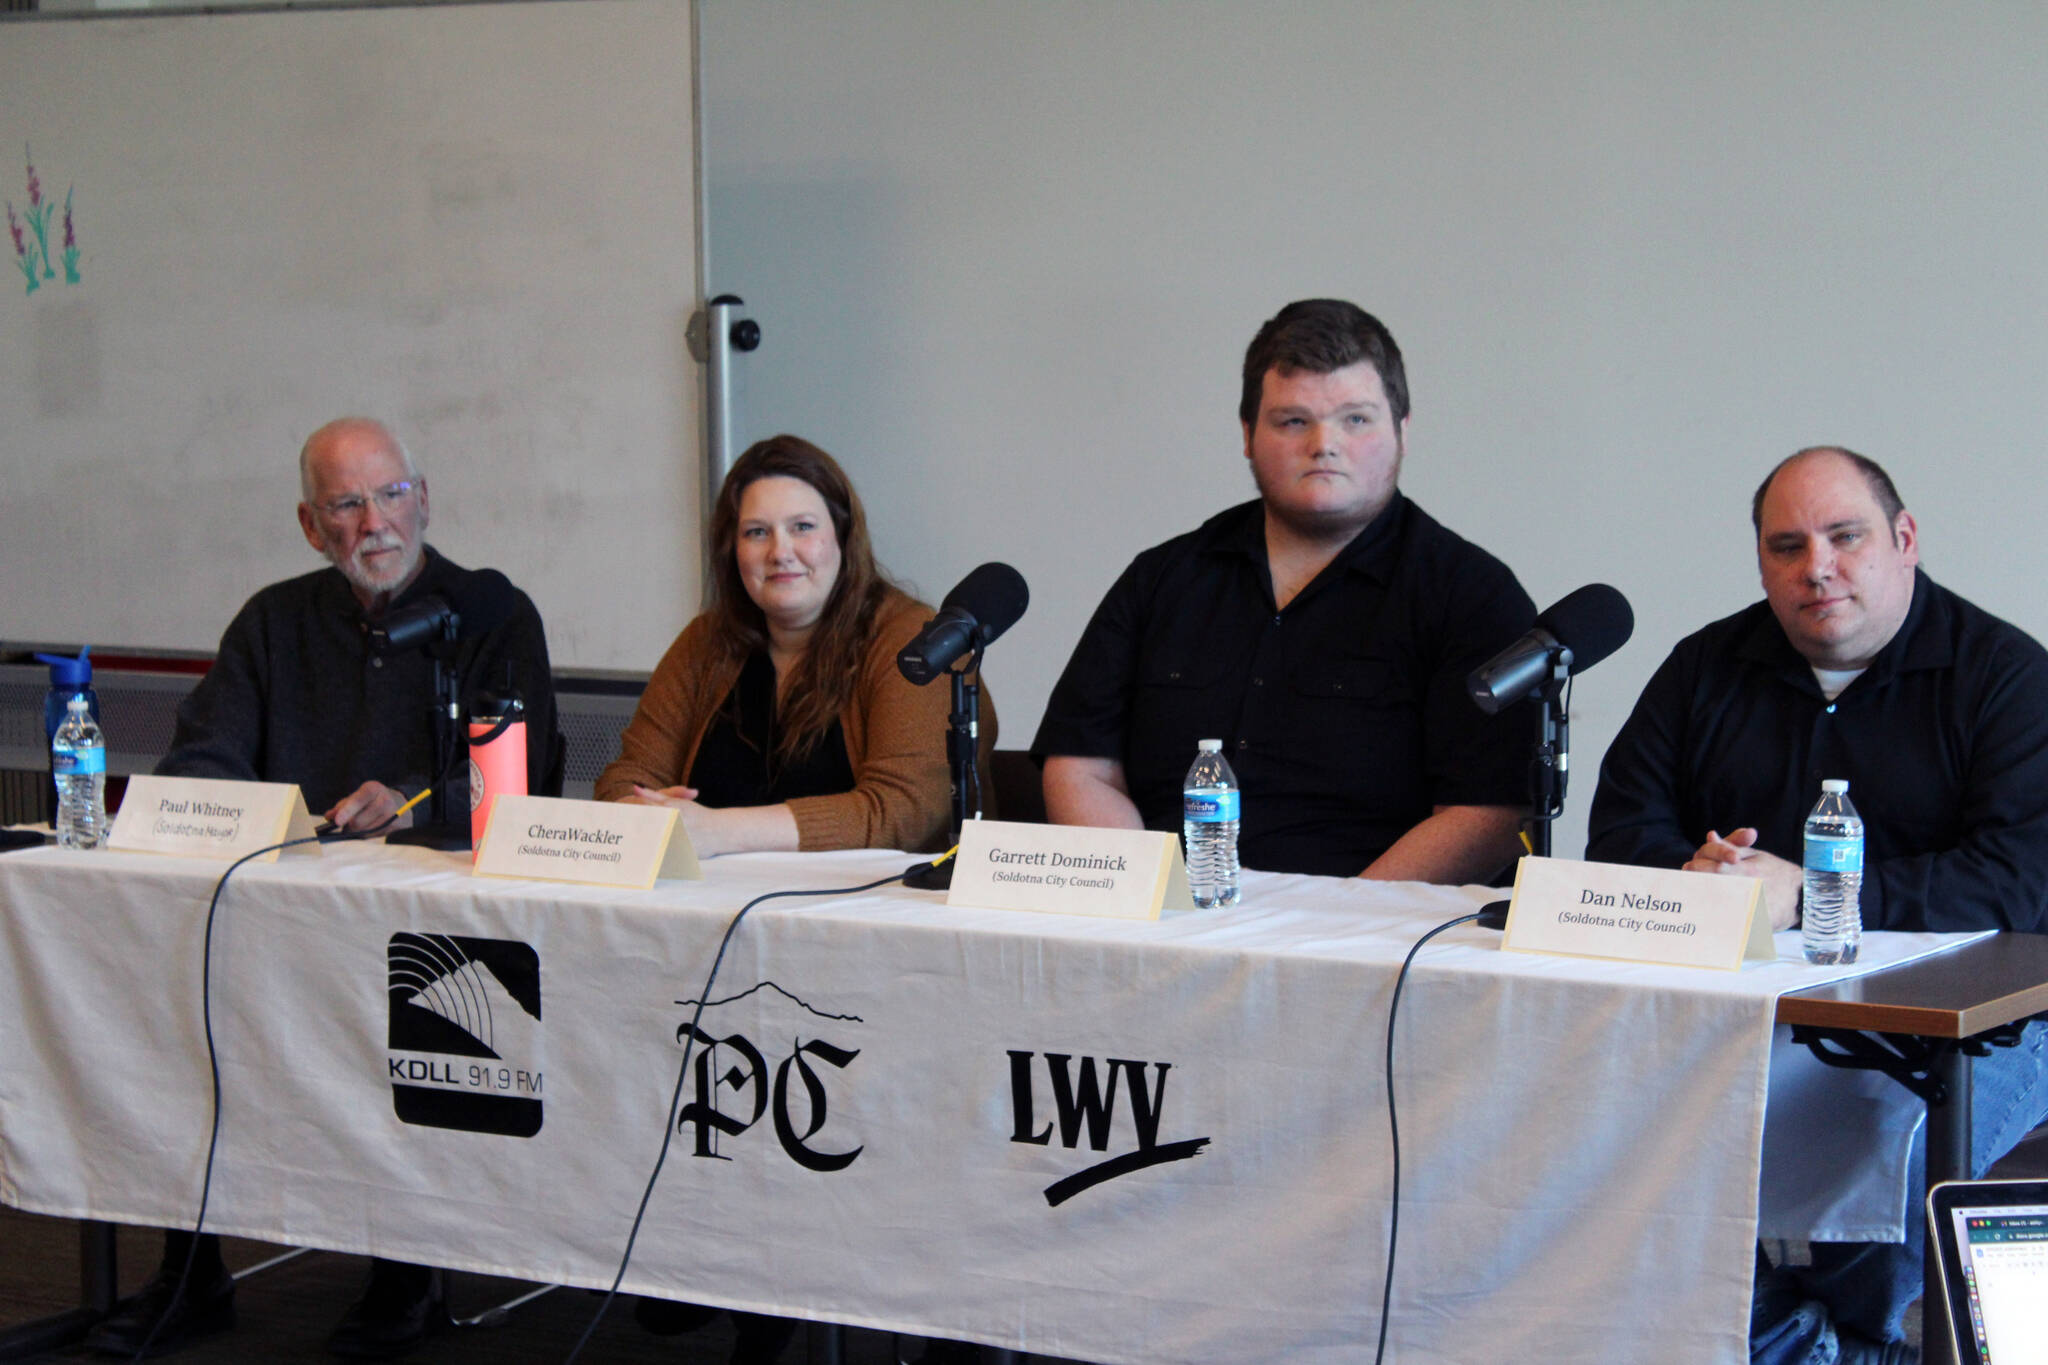 Paul Whitney, Chera Wackler, Garrett Dominick and Dan Nelson participate in a Soldotna City Council candidate forum at the Soldotna Public Library in Soldotna, Alaska, on Monday, Sept. 4, 2023. (Jake Dye/Peninsula Clarion)